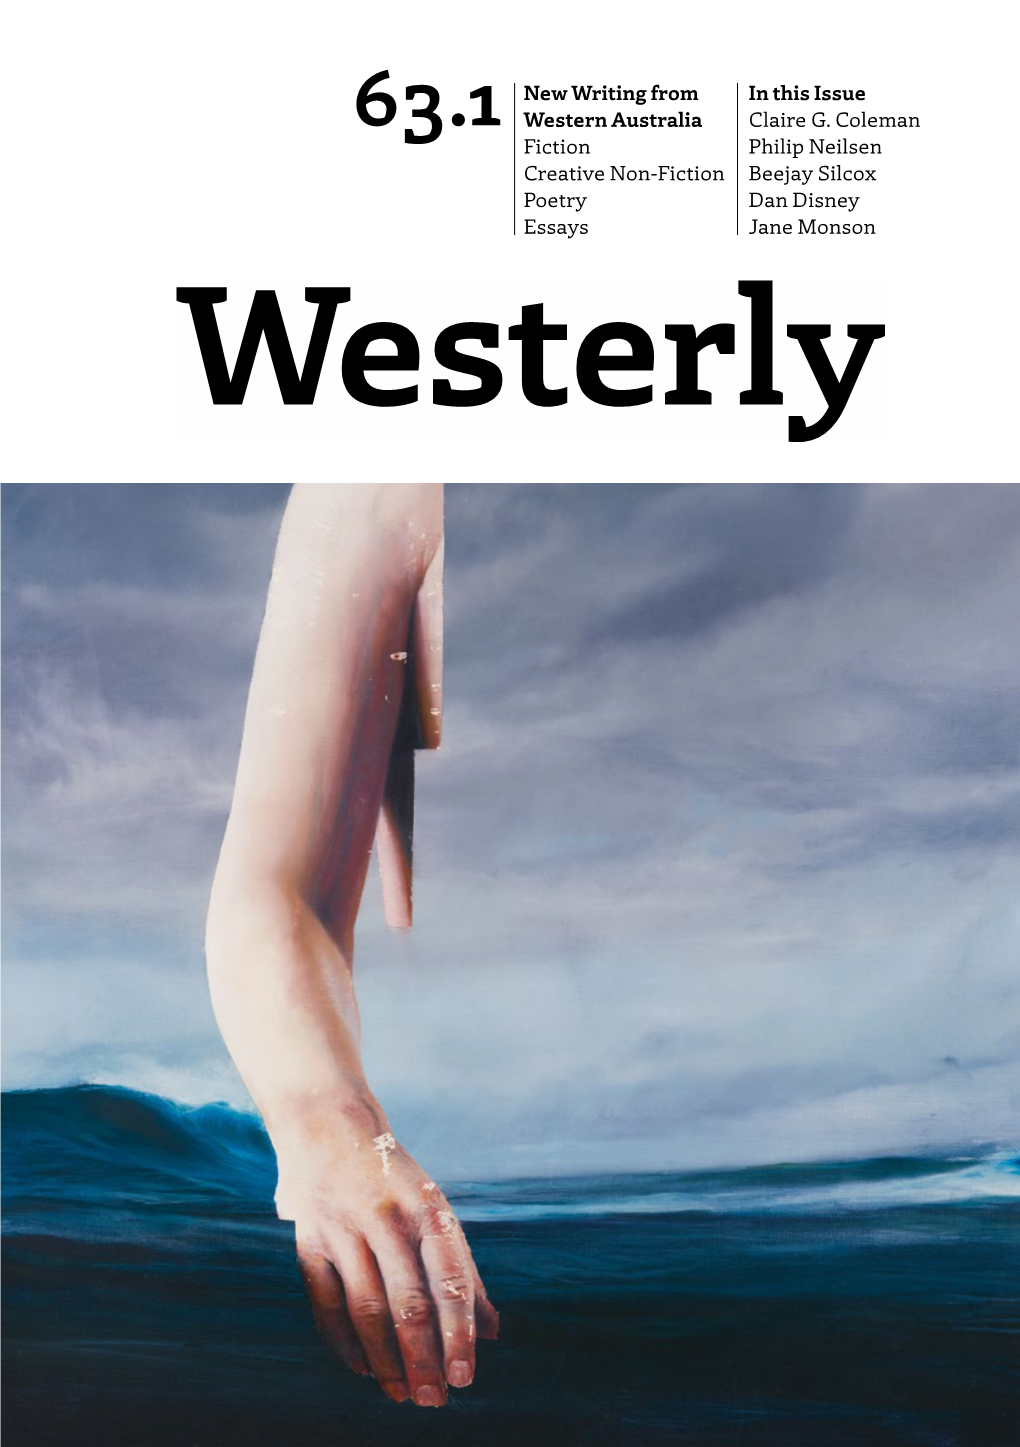 New Writing from Western Australia Fiction Creative Non-Fiction Poetry